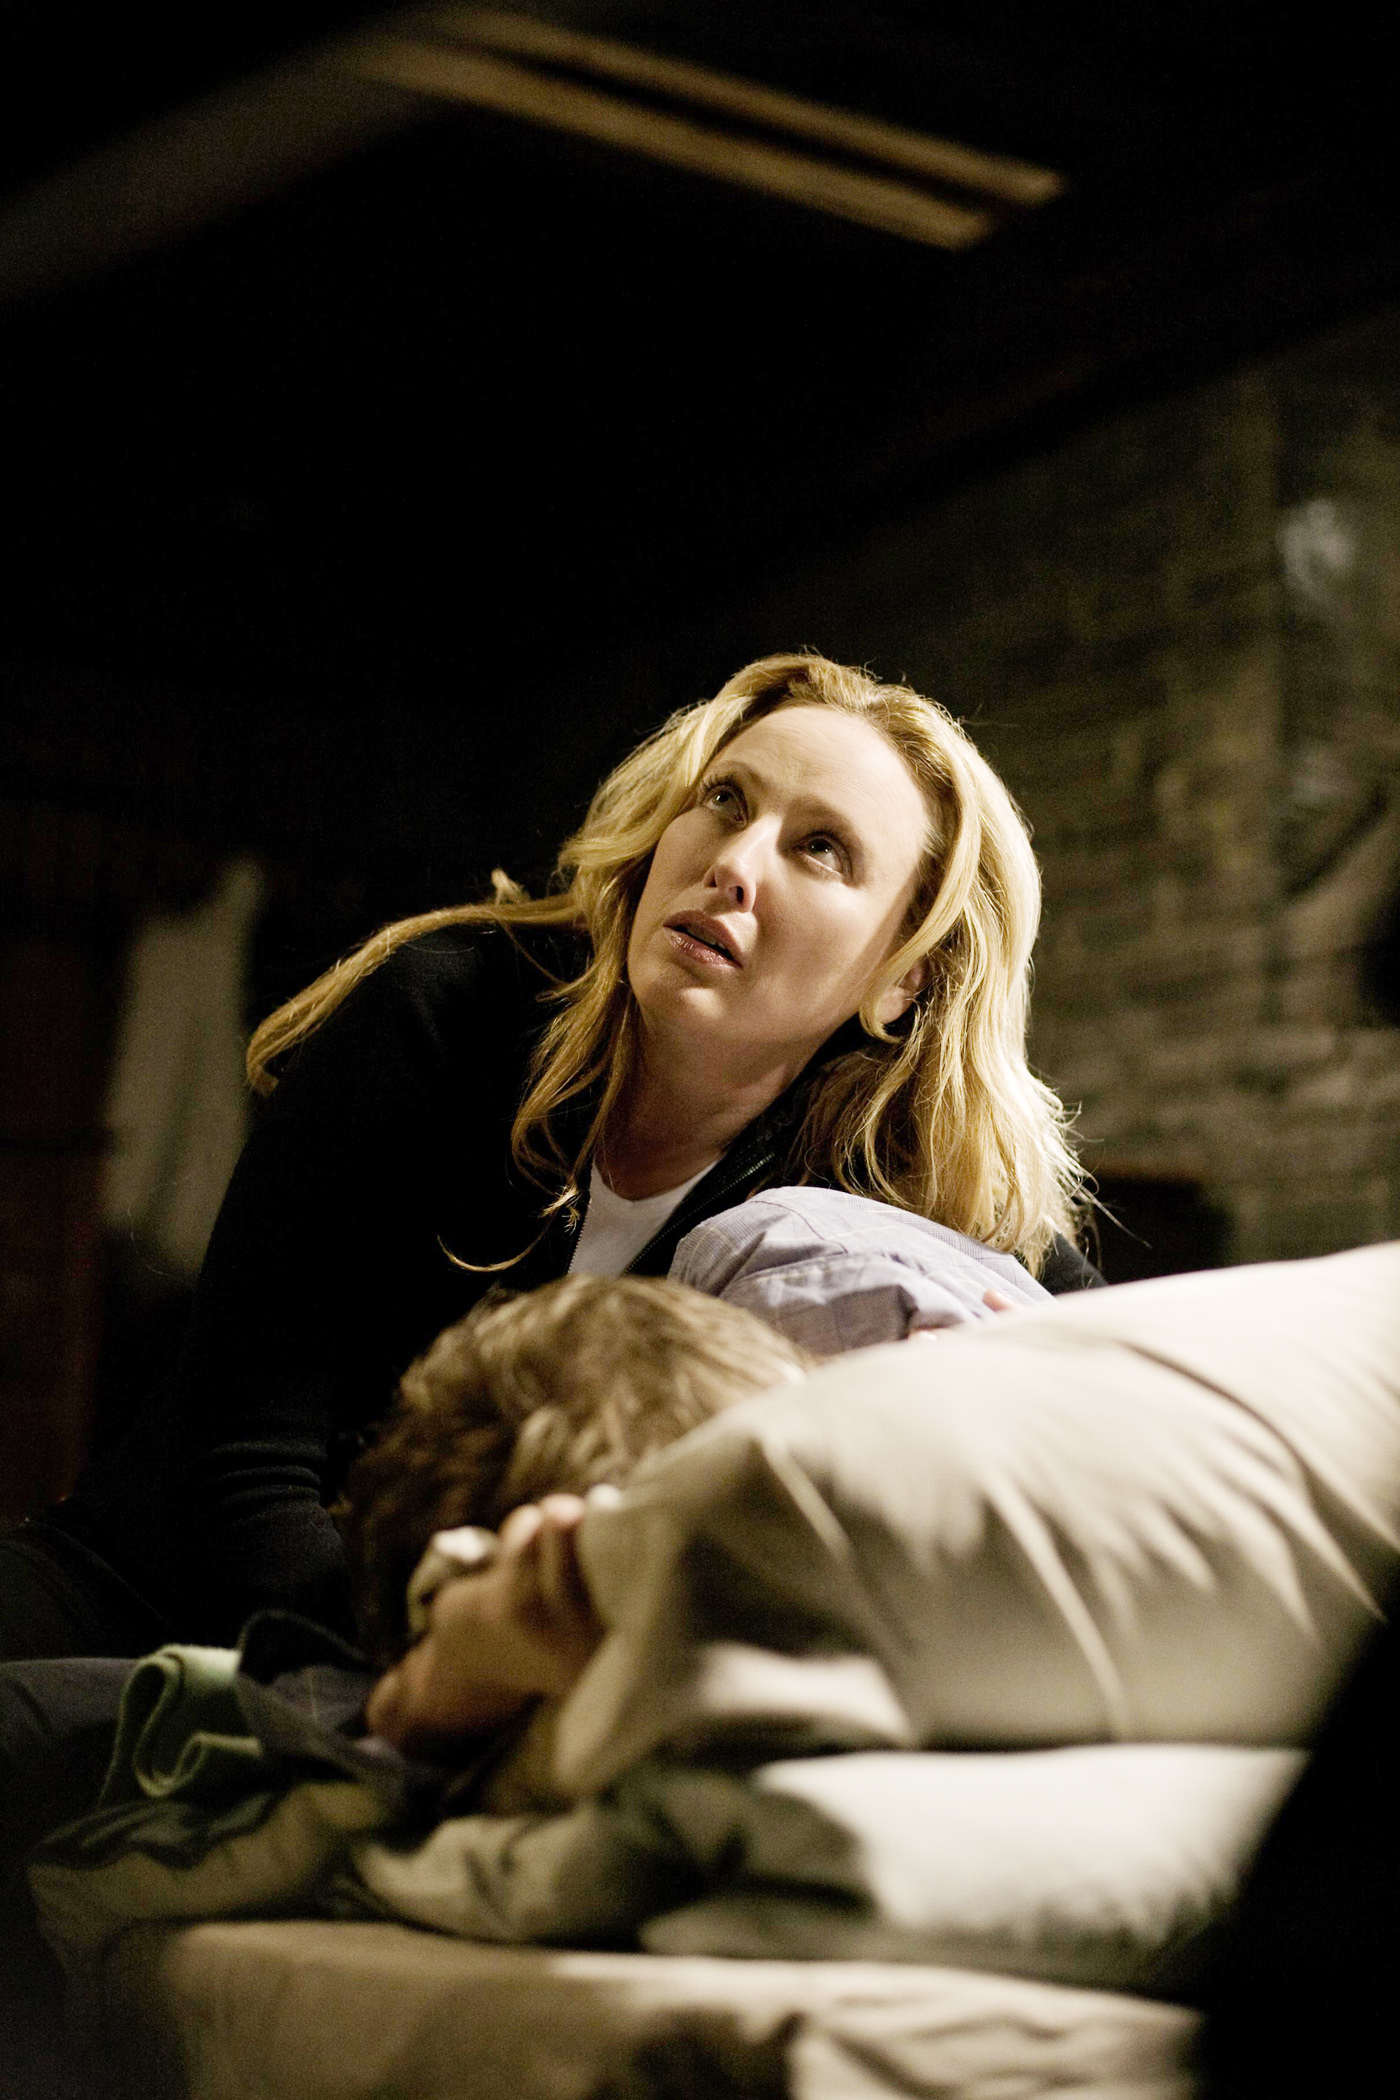 Virginia Madsen stars as Sara Campbell in Gold Circle Films' The Haunting in Connecticut (2009)